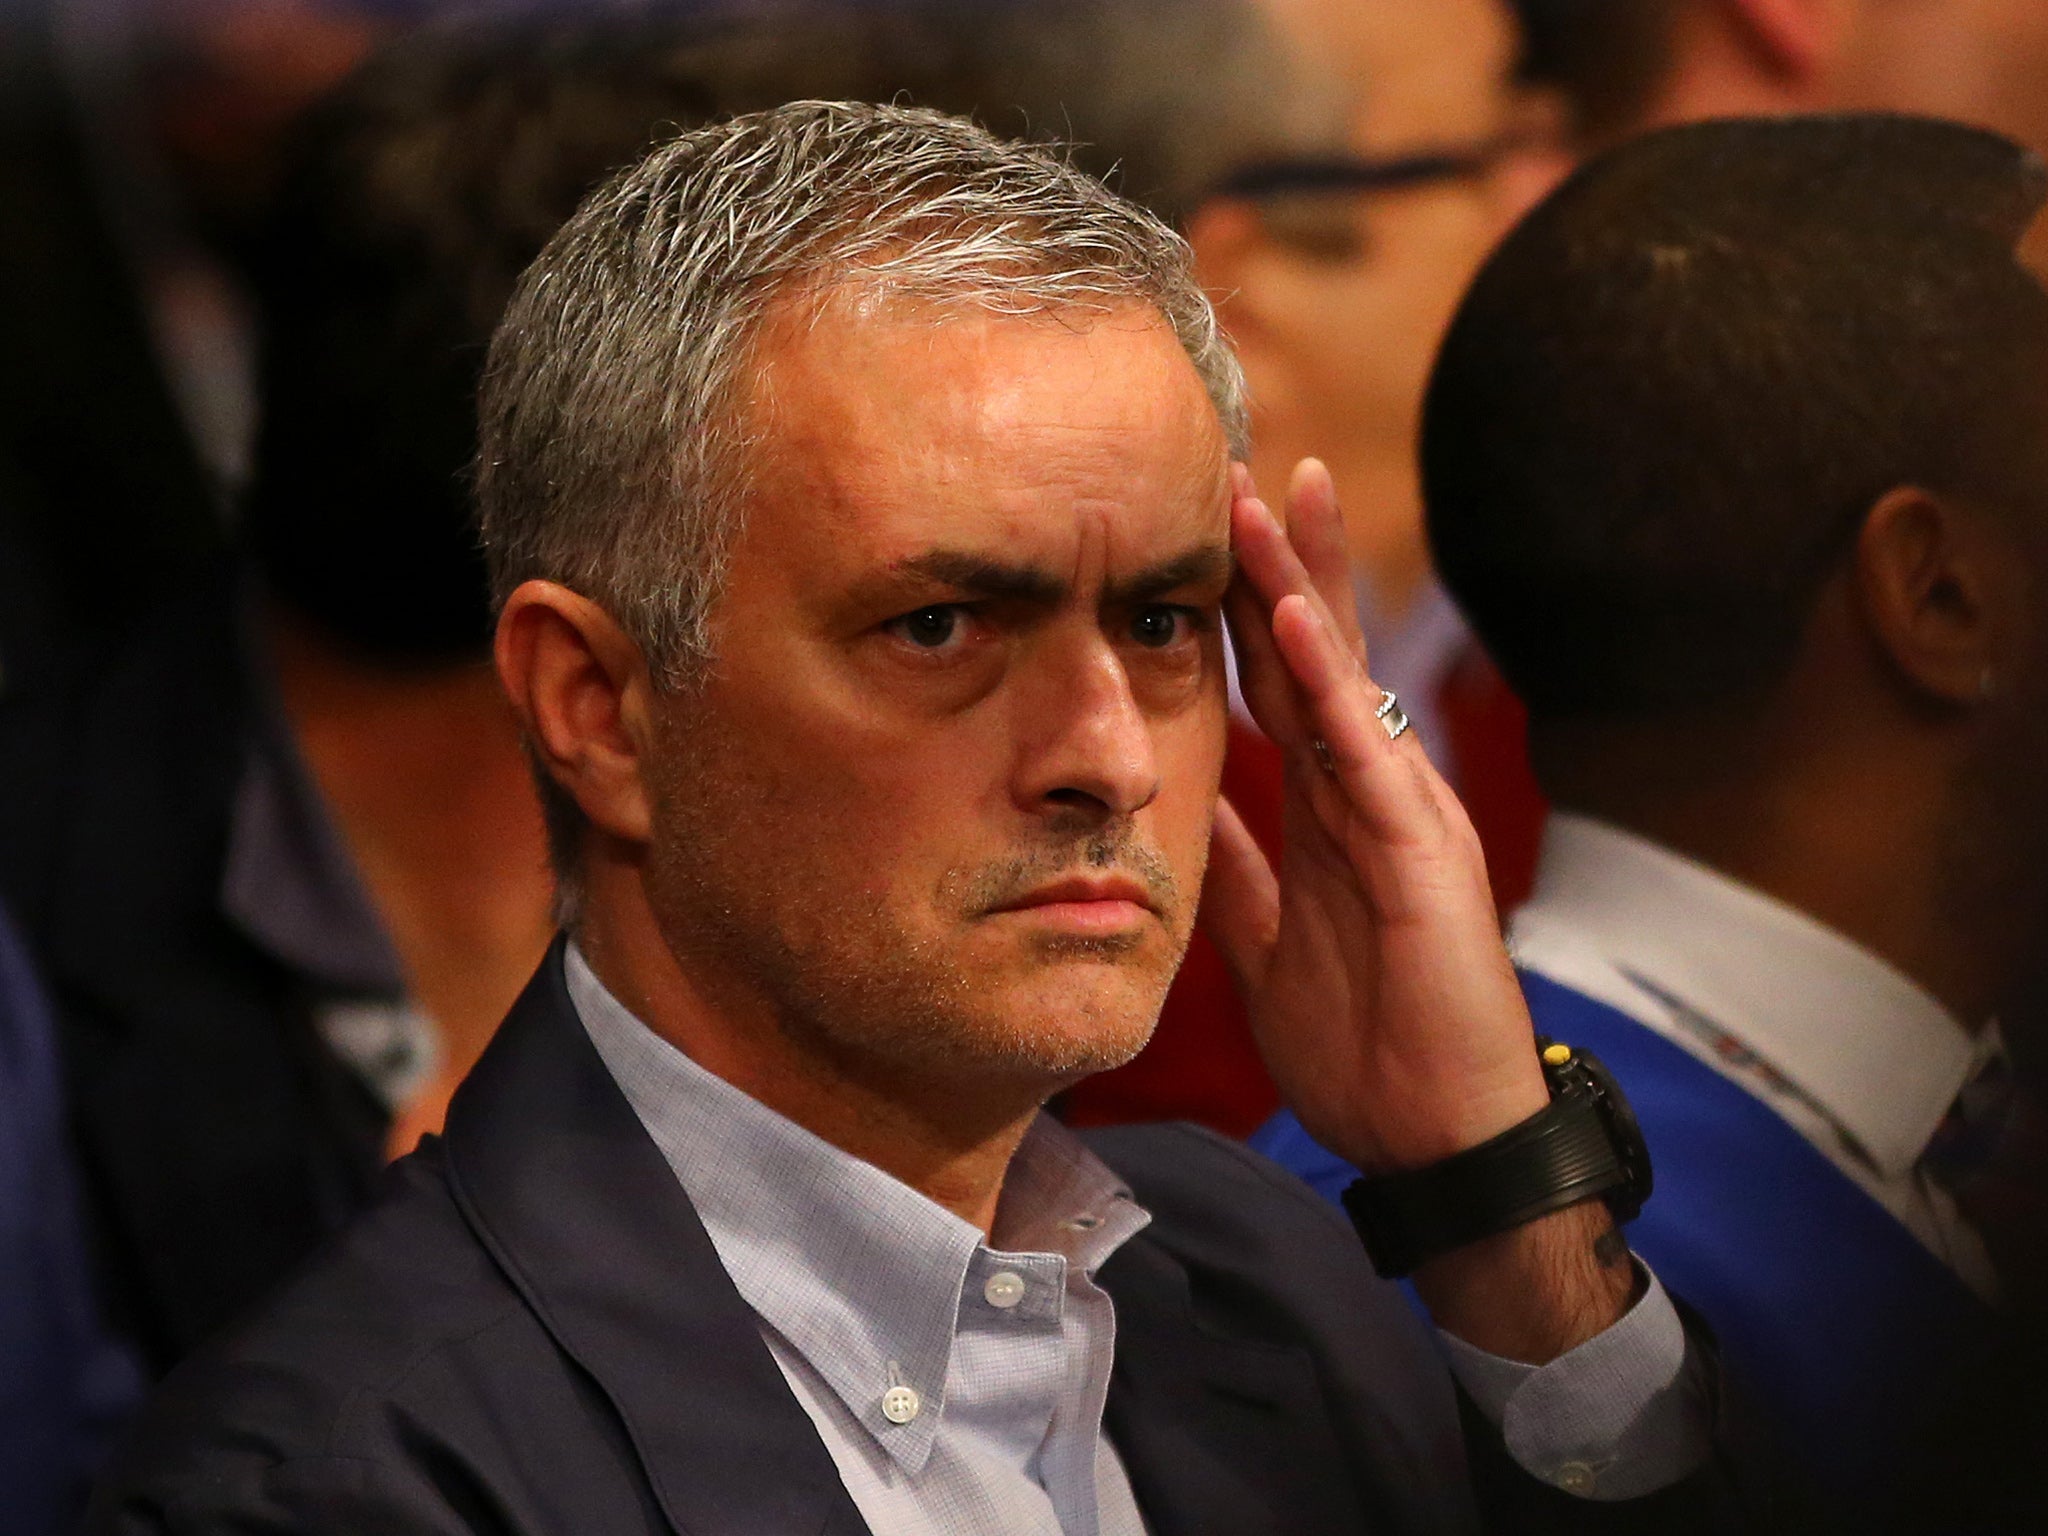 Mourinho has been tipped to replace Louis van Gaal at Old Trafford